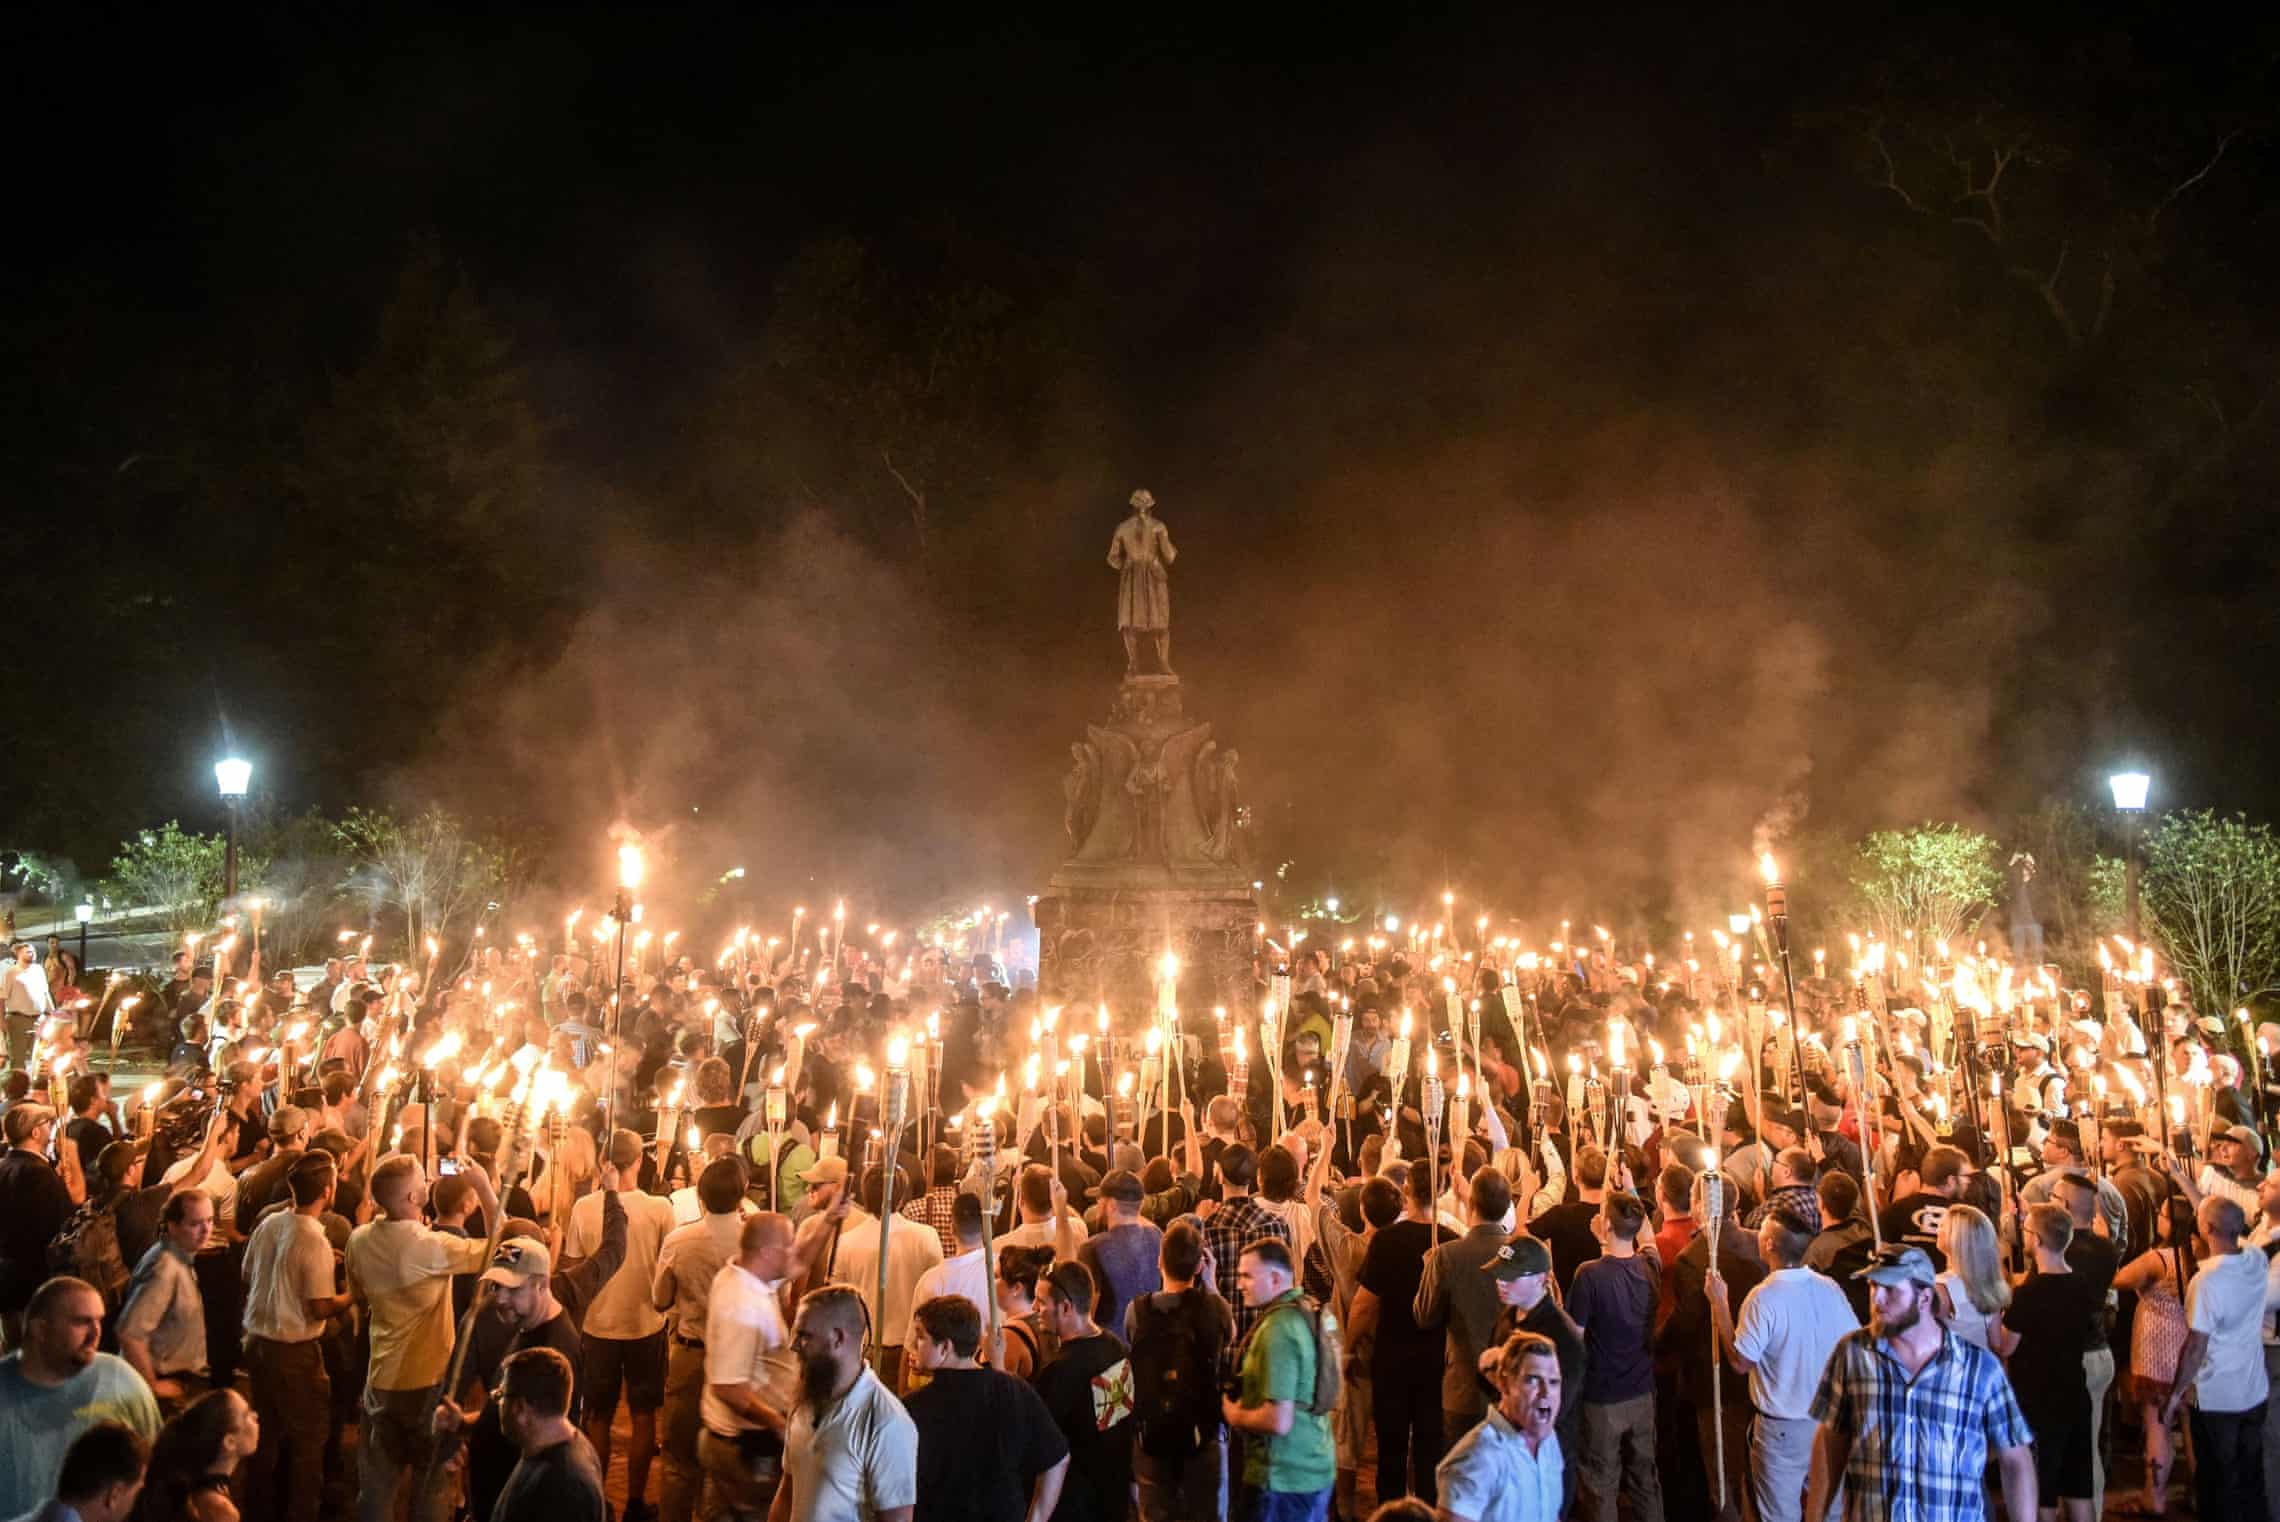 White Supremacist rally in 2017